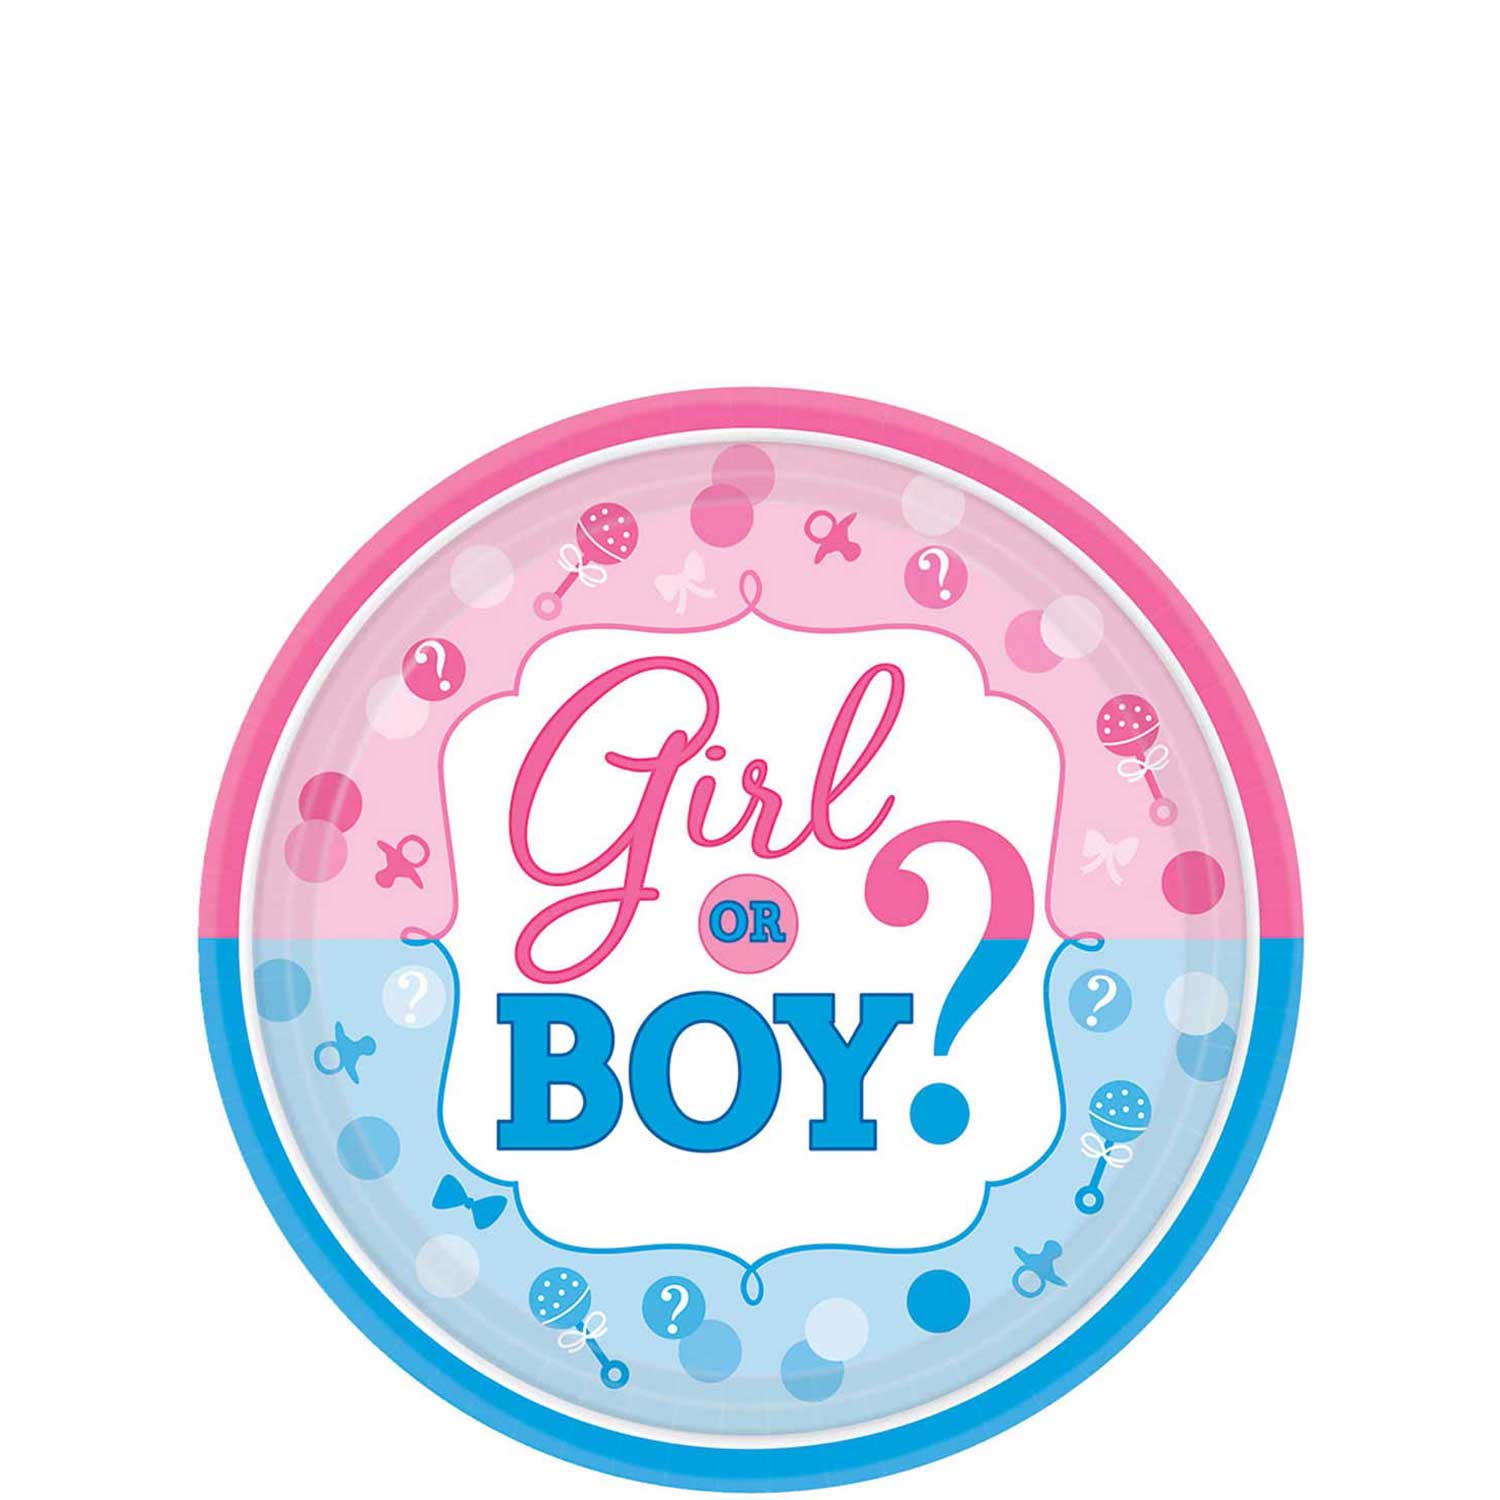 Girl Or Boy? Round Paper Plates 7in, 8pcs Printed Tableware - Party Centre